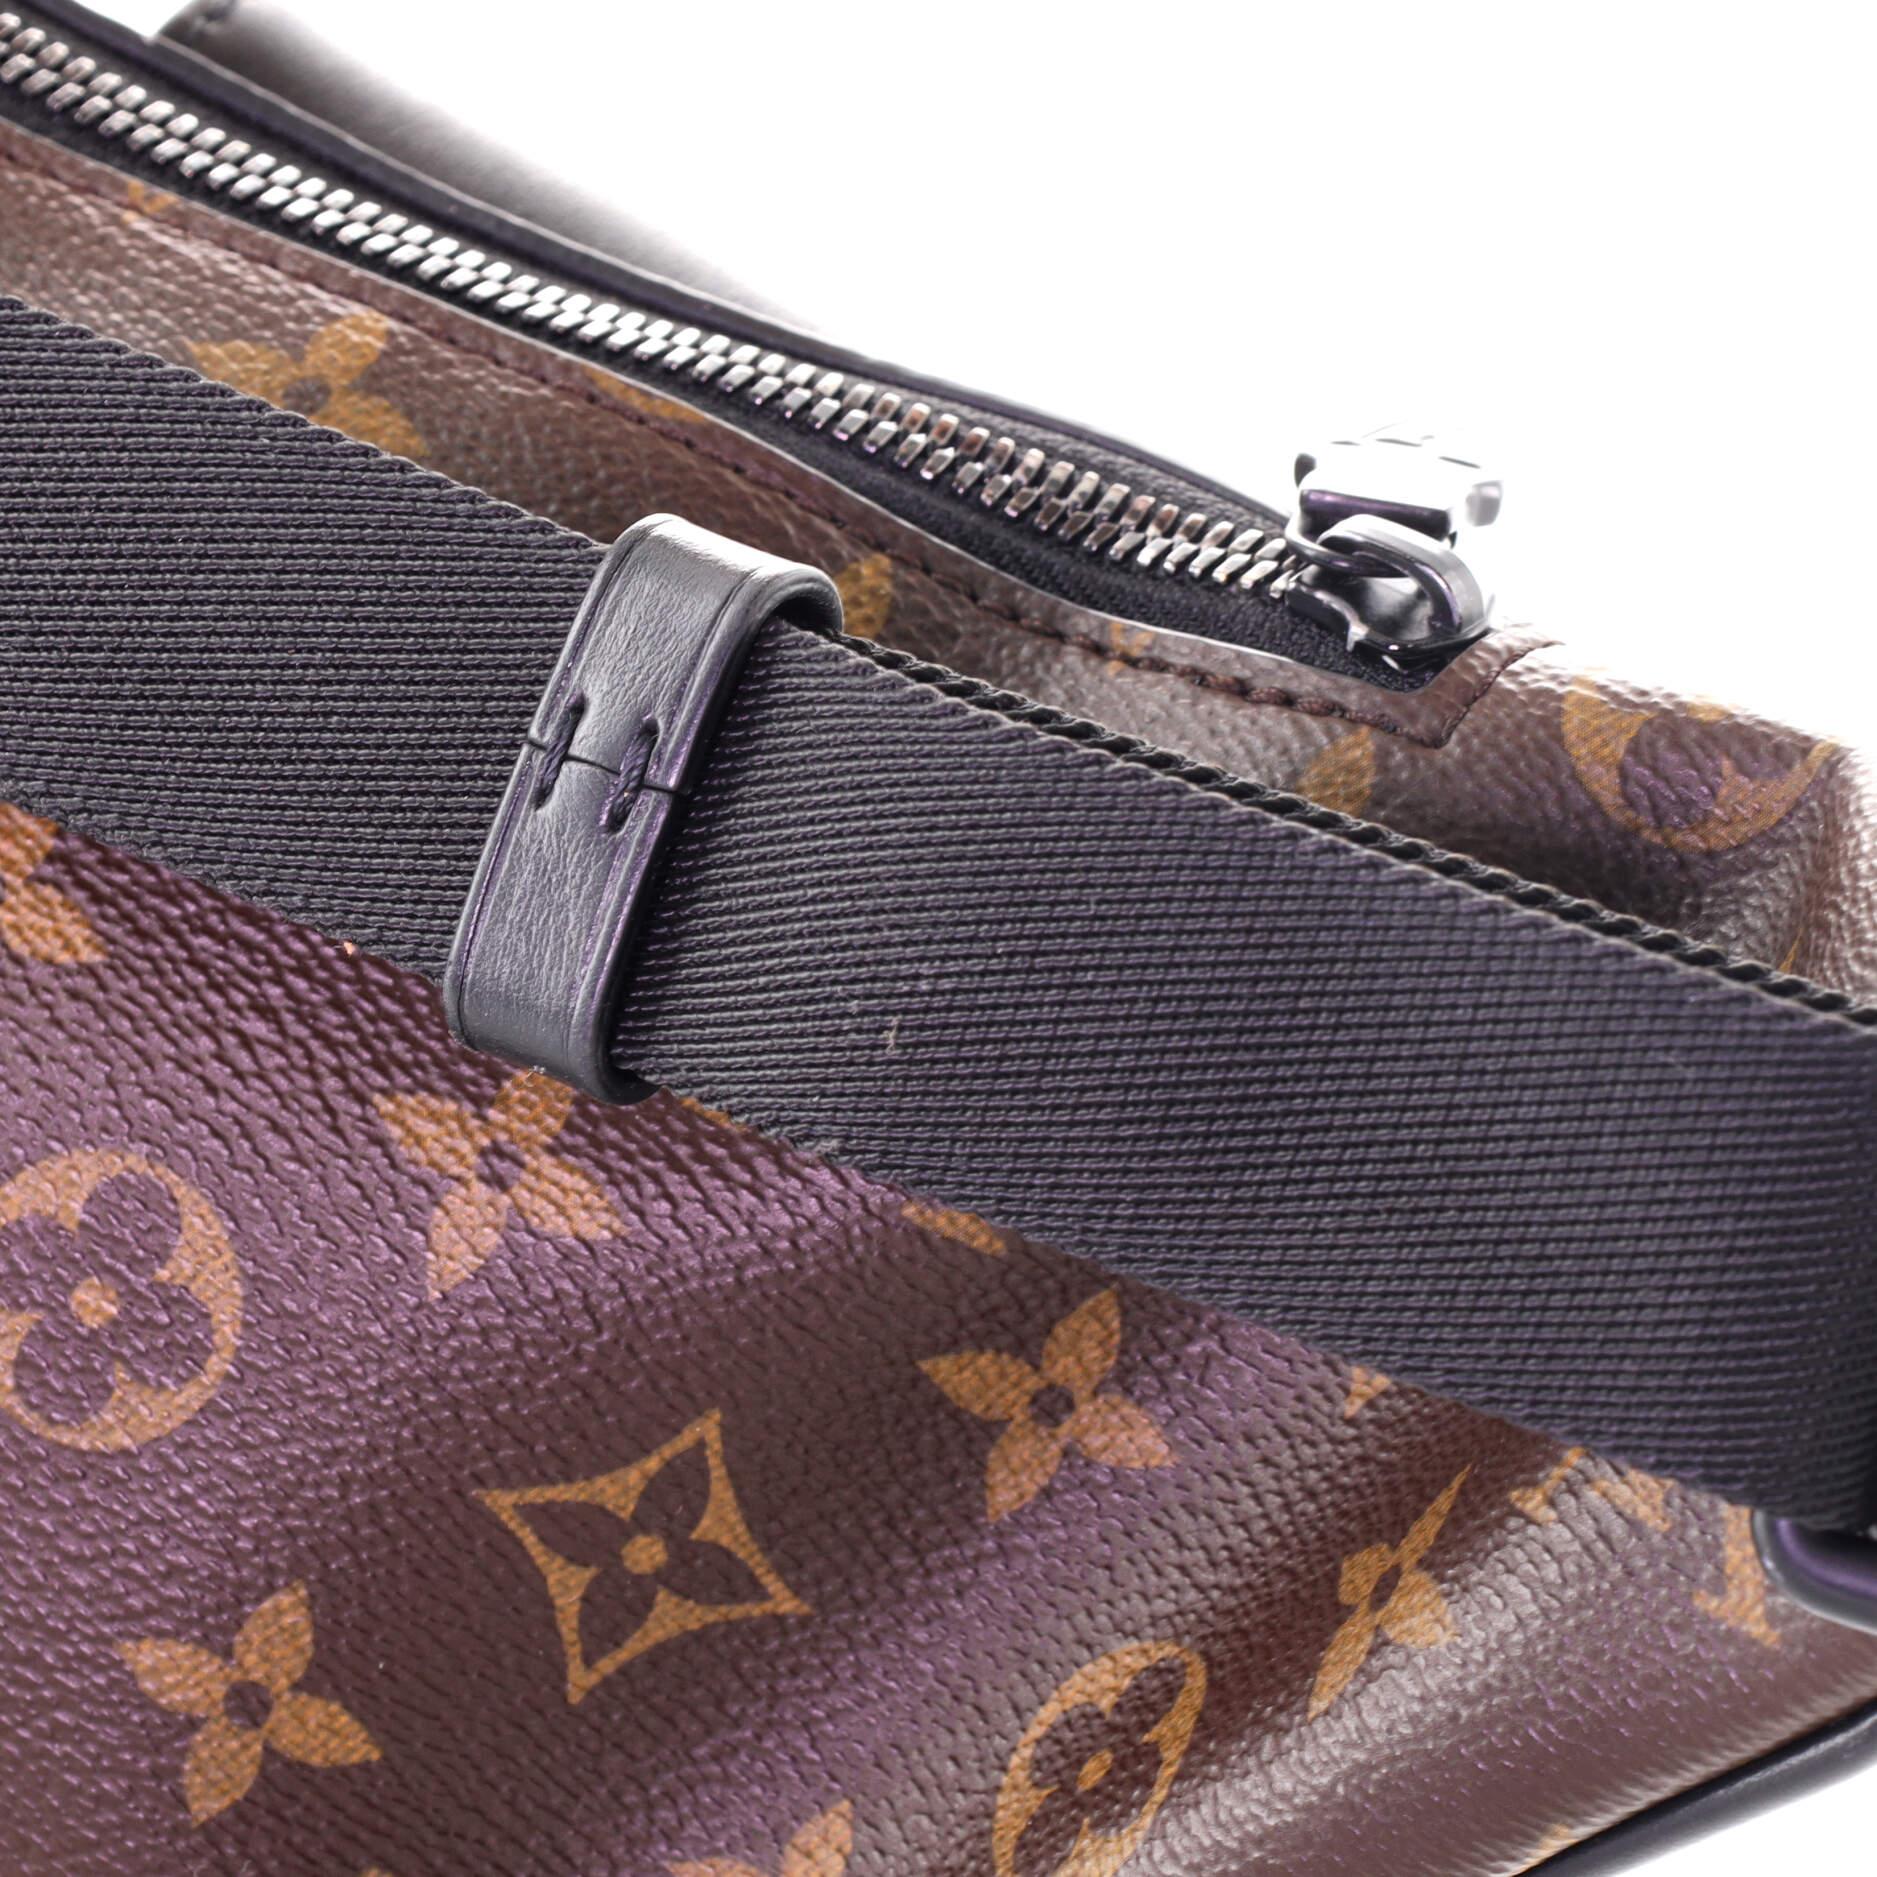 Louis Vuitton Christopher Bumbag Macassar Monogram Canvas In Good Condition In NY, NY